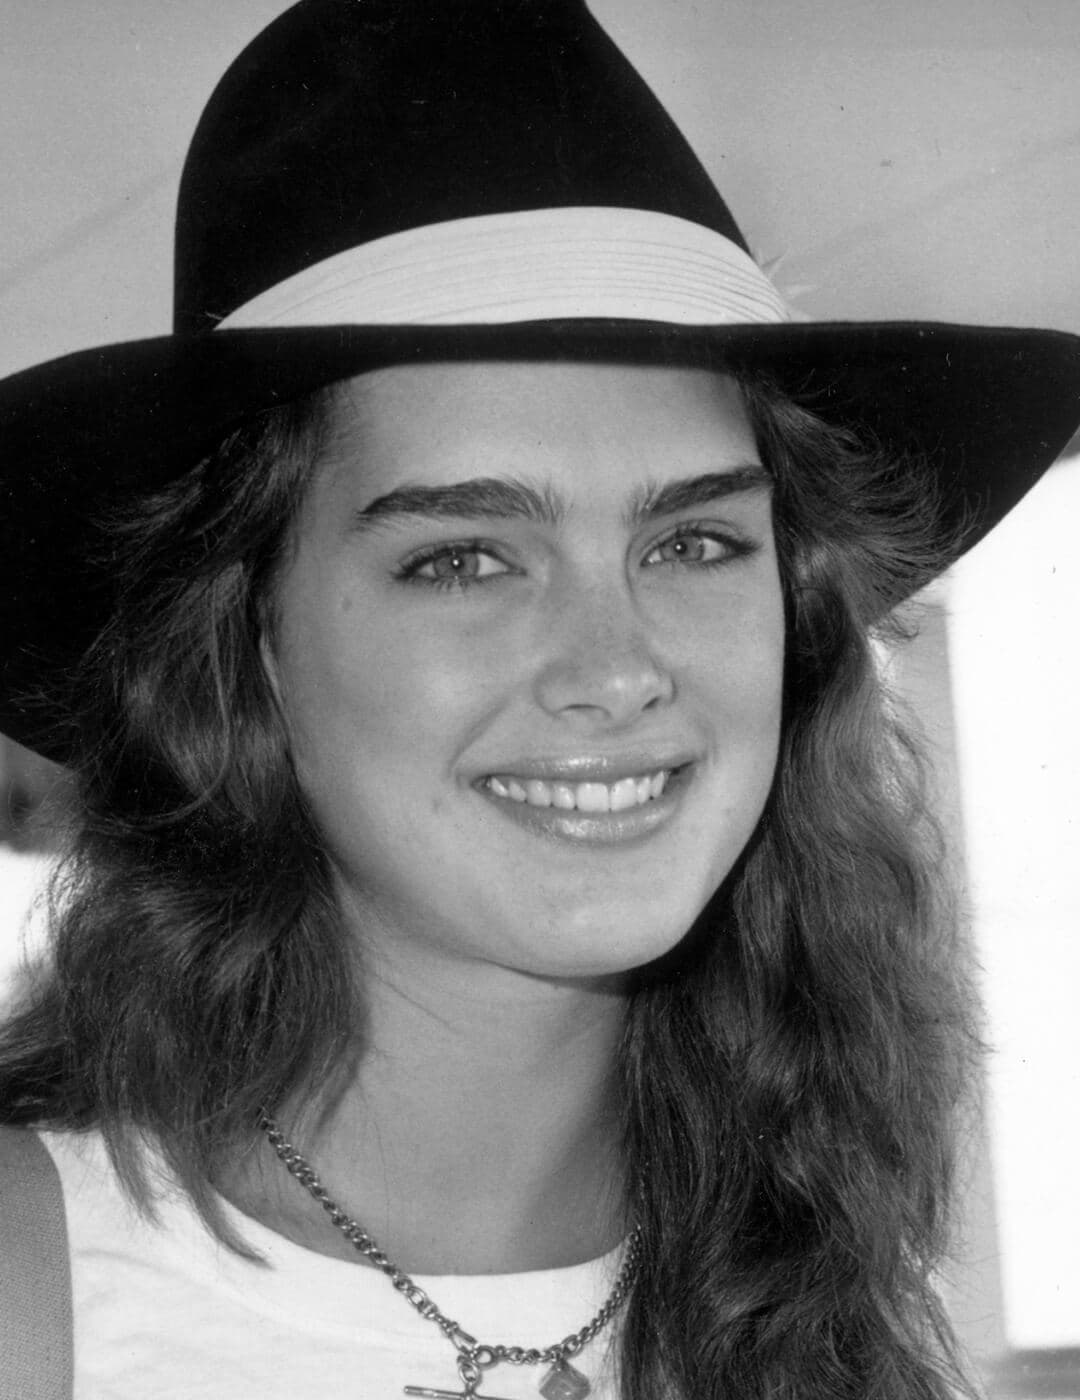 A photo of Brooke Shields wearing a dark hat with a white brim, and holding a pair of sunglasses, circa 1985